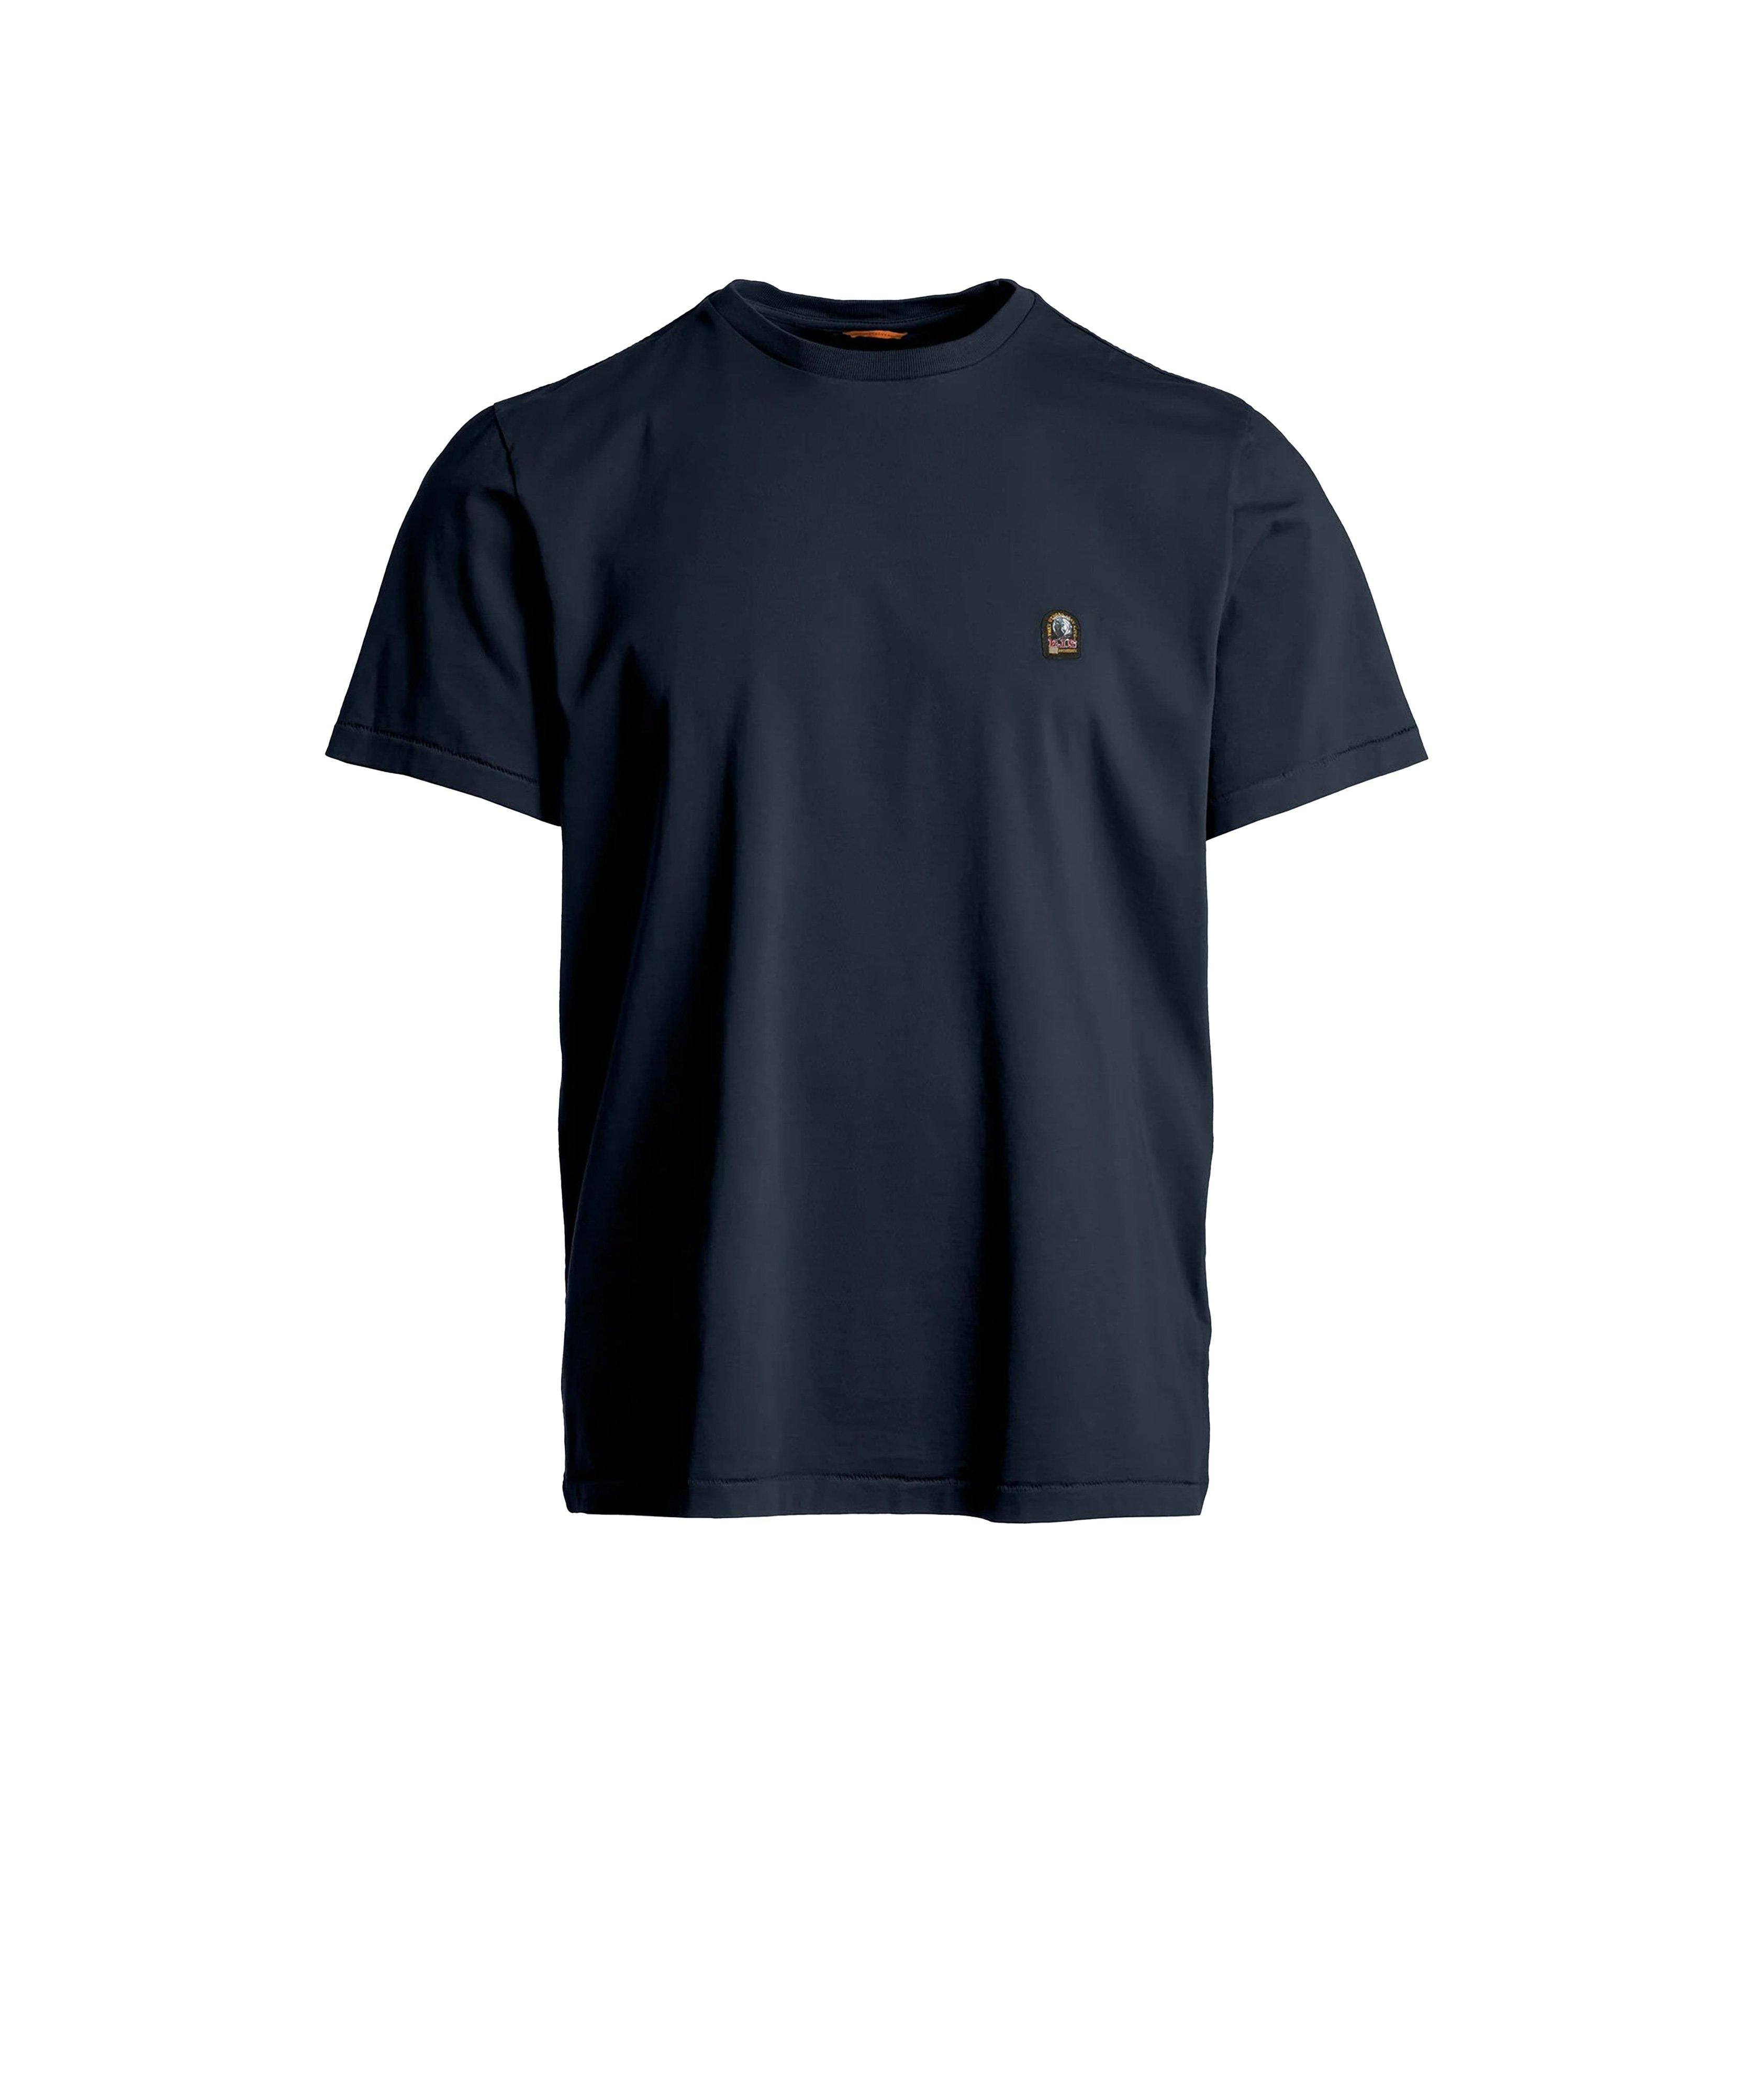 Cotton Patch Tee image 0